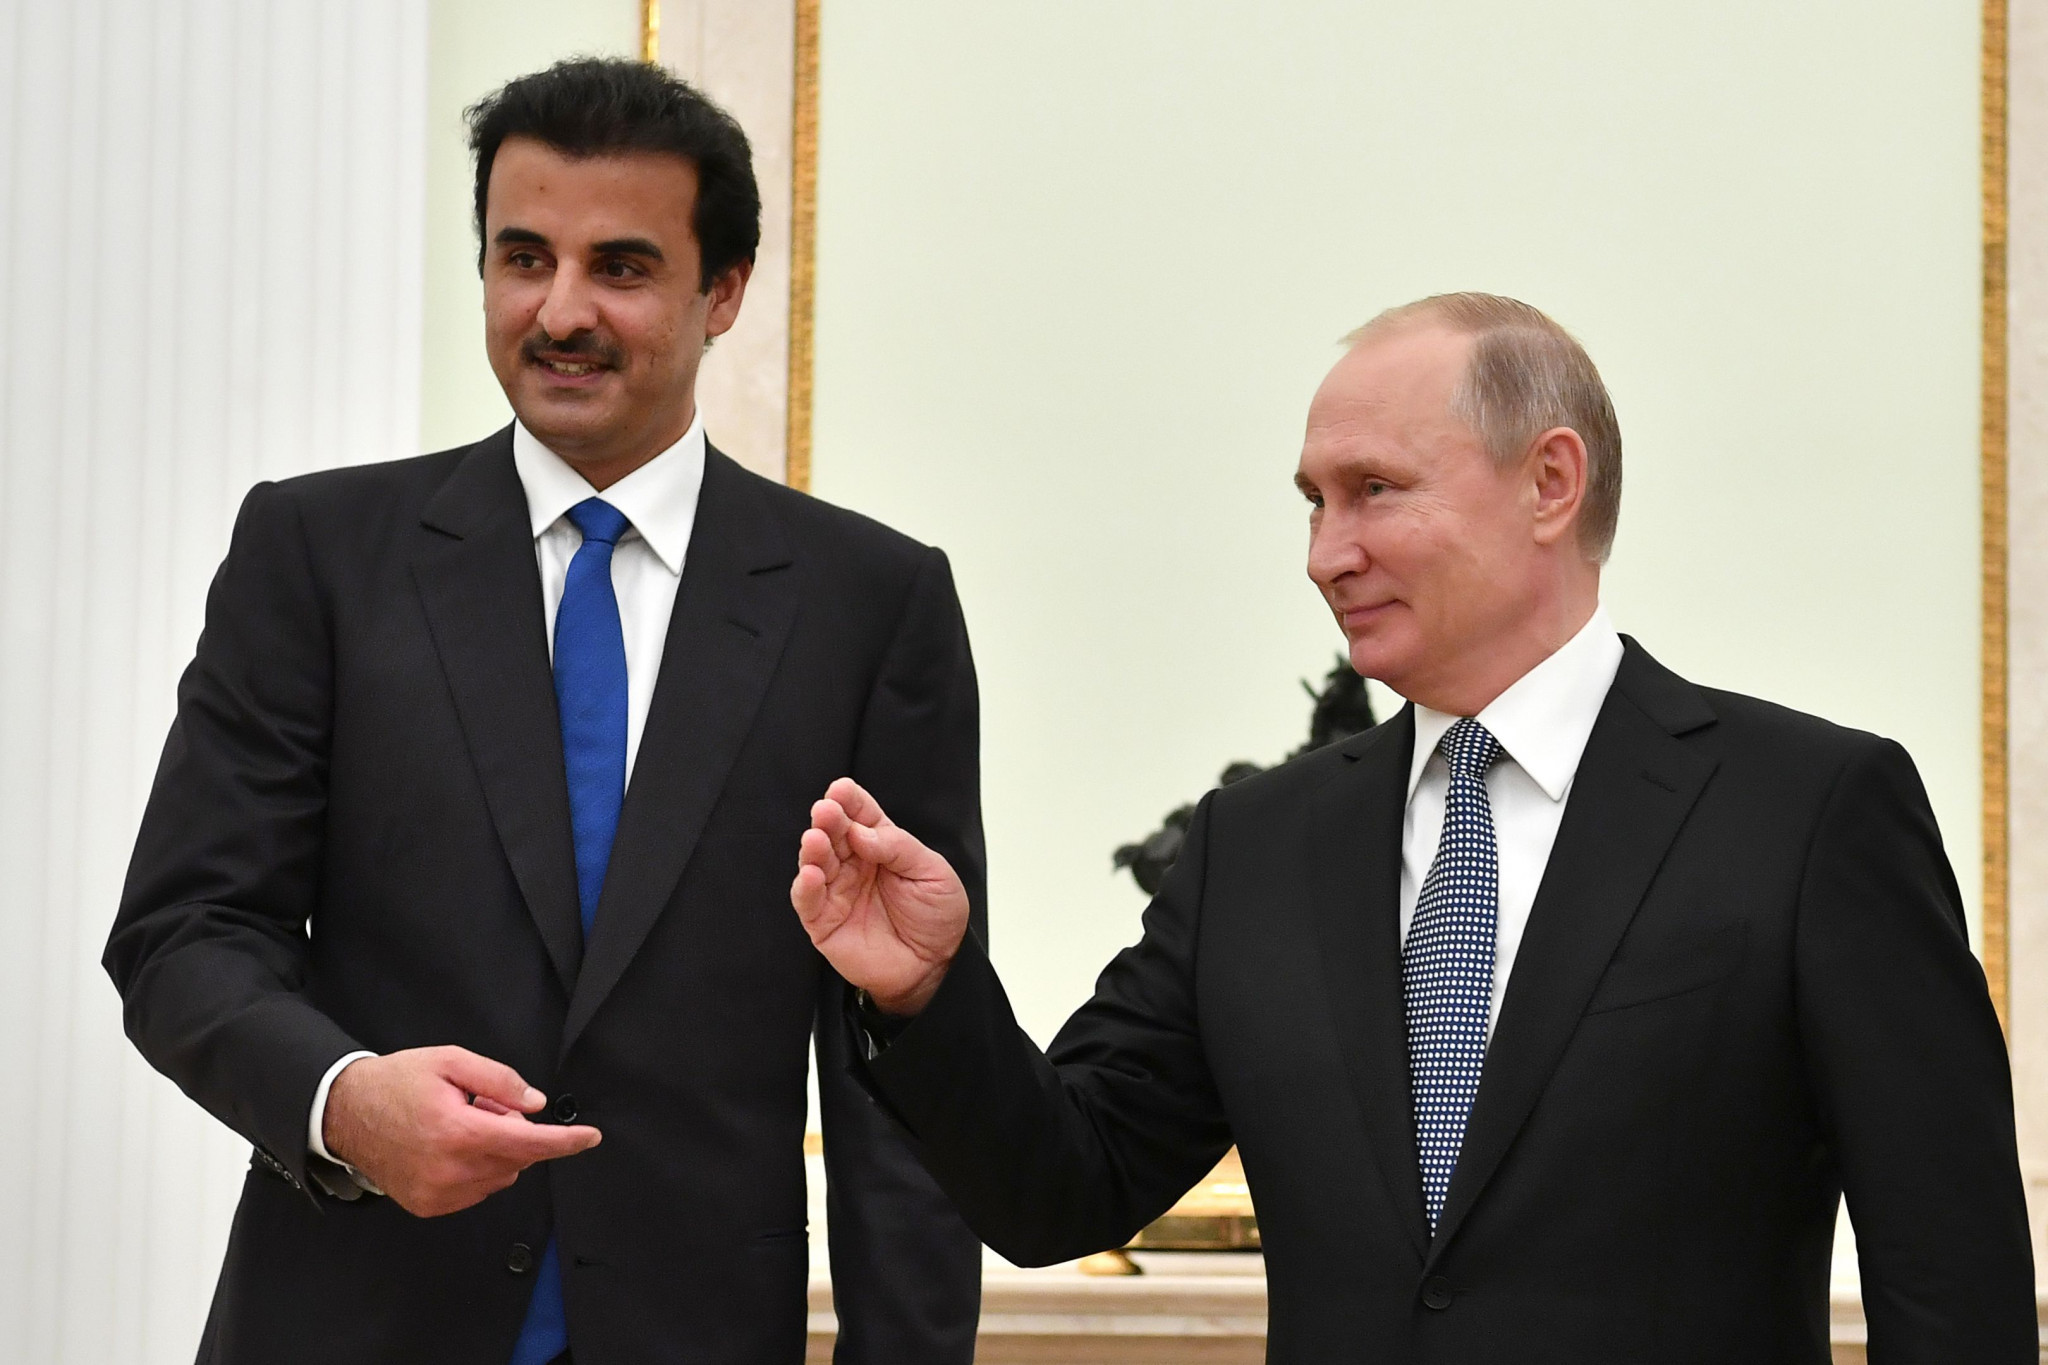 The Emir of Qatar and Russian President Vladimir Putin took part in the handover ceremony ©Getty Images 